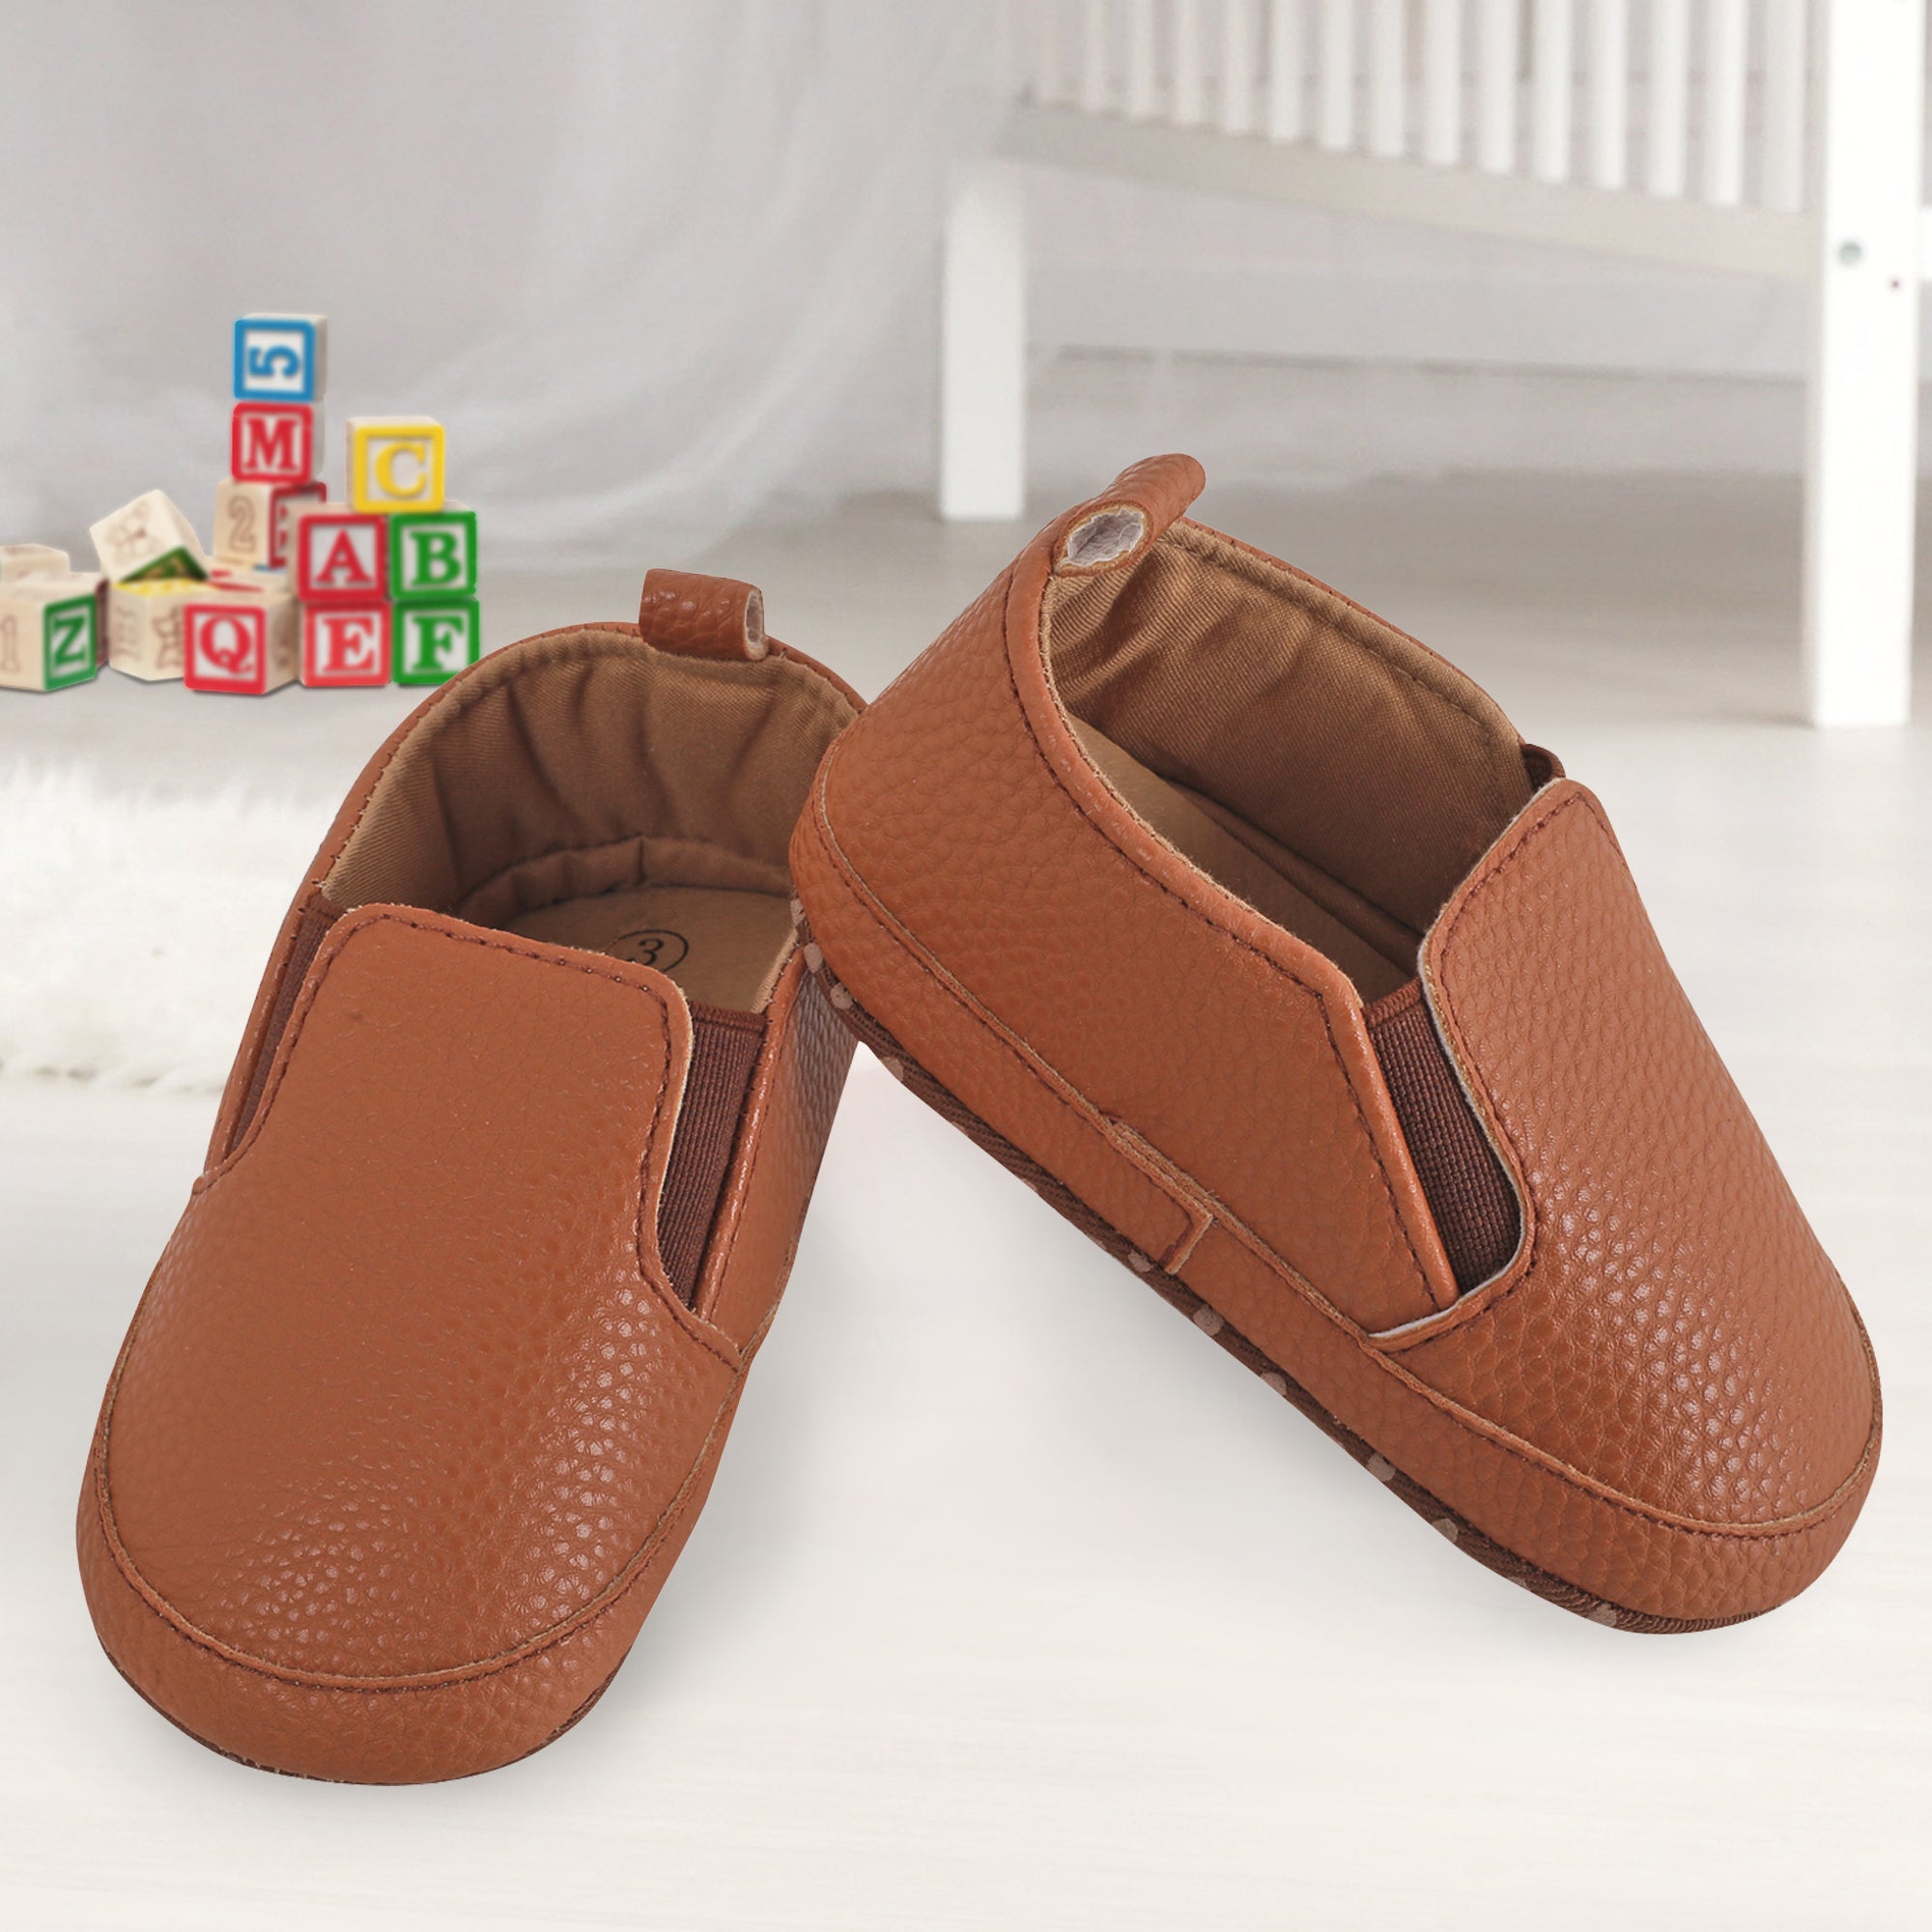 Baby Moo Leather Brown Slip-On Booties